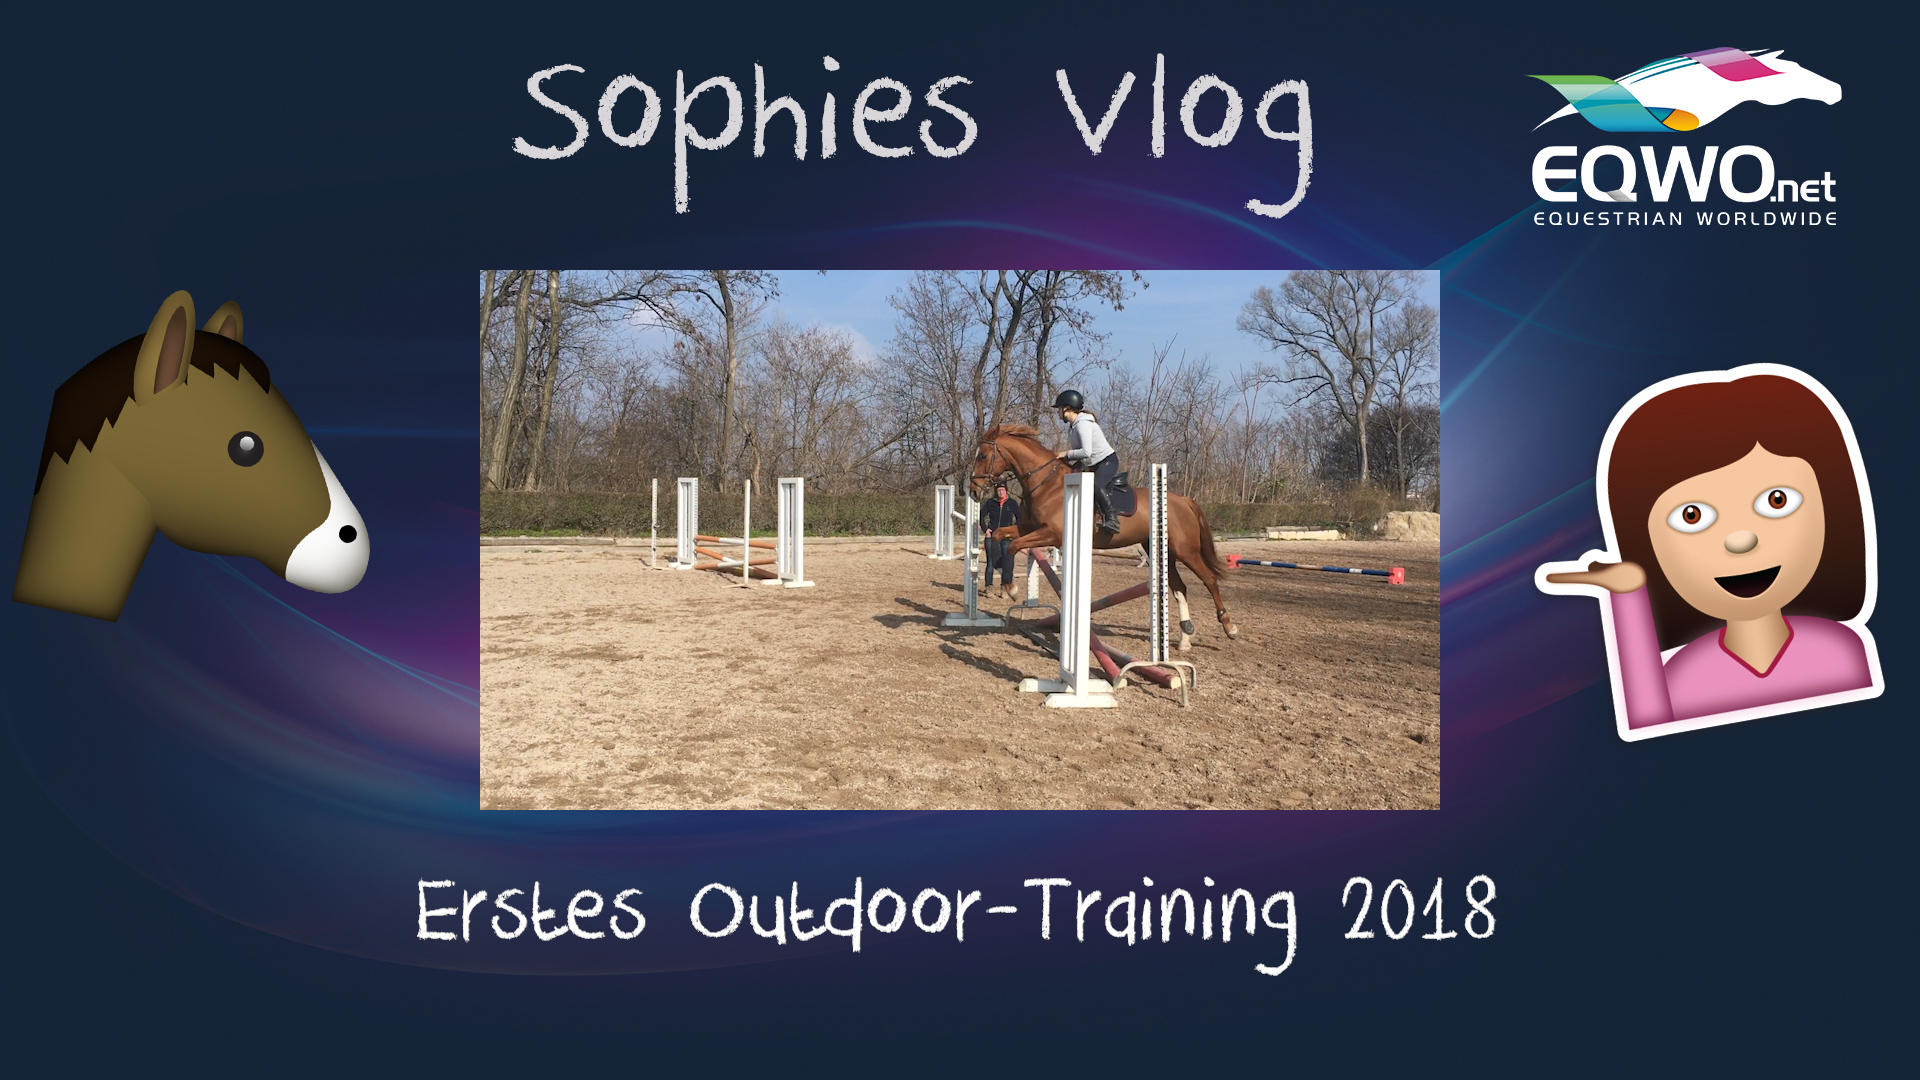 Sophies Vlog: Erstes Outdoor-Training 2018